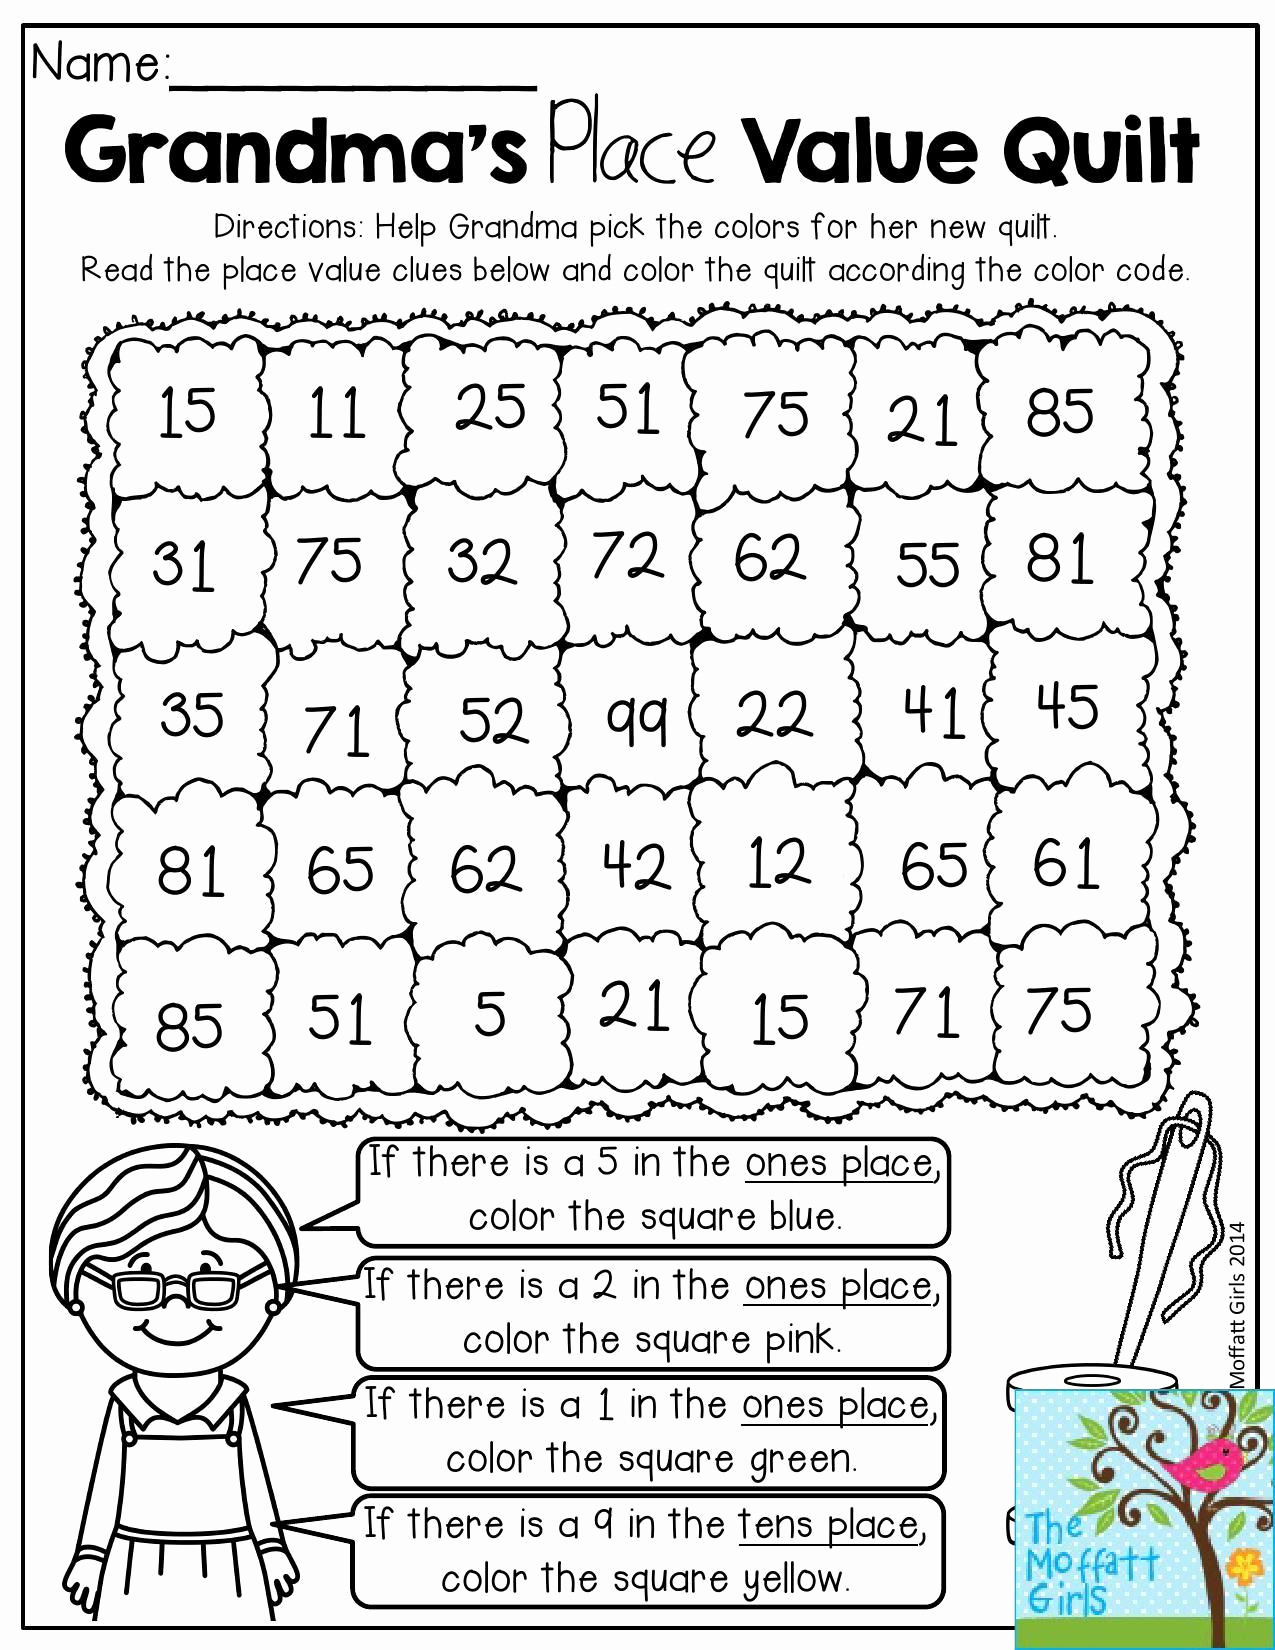 Place Value Printable Games 2nd Grade Lovely Grandma - Place Value Activities 2nd Grade , HD Wallpaper & Backgrounds